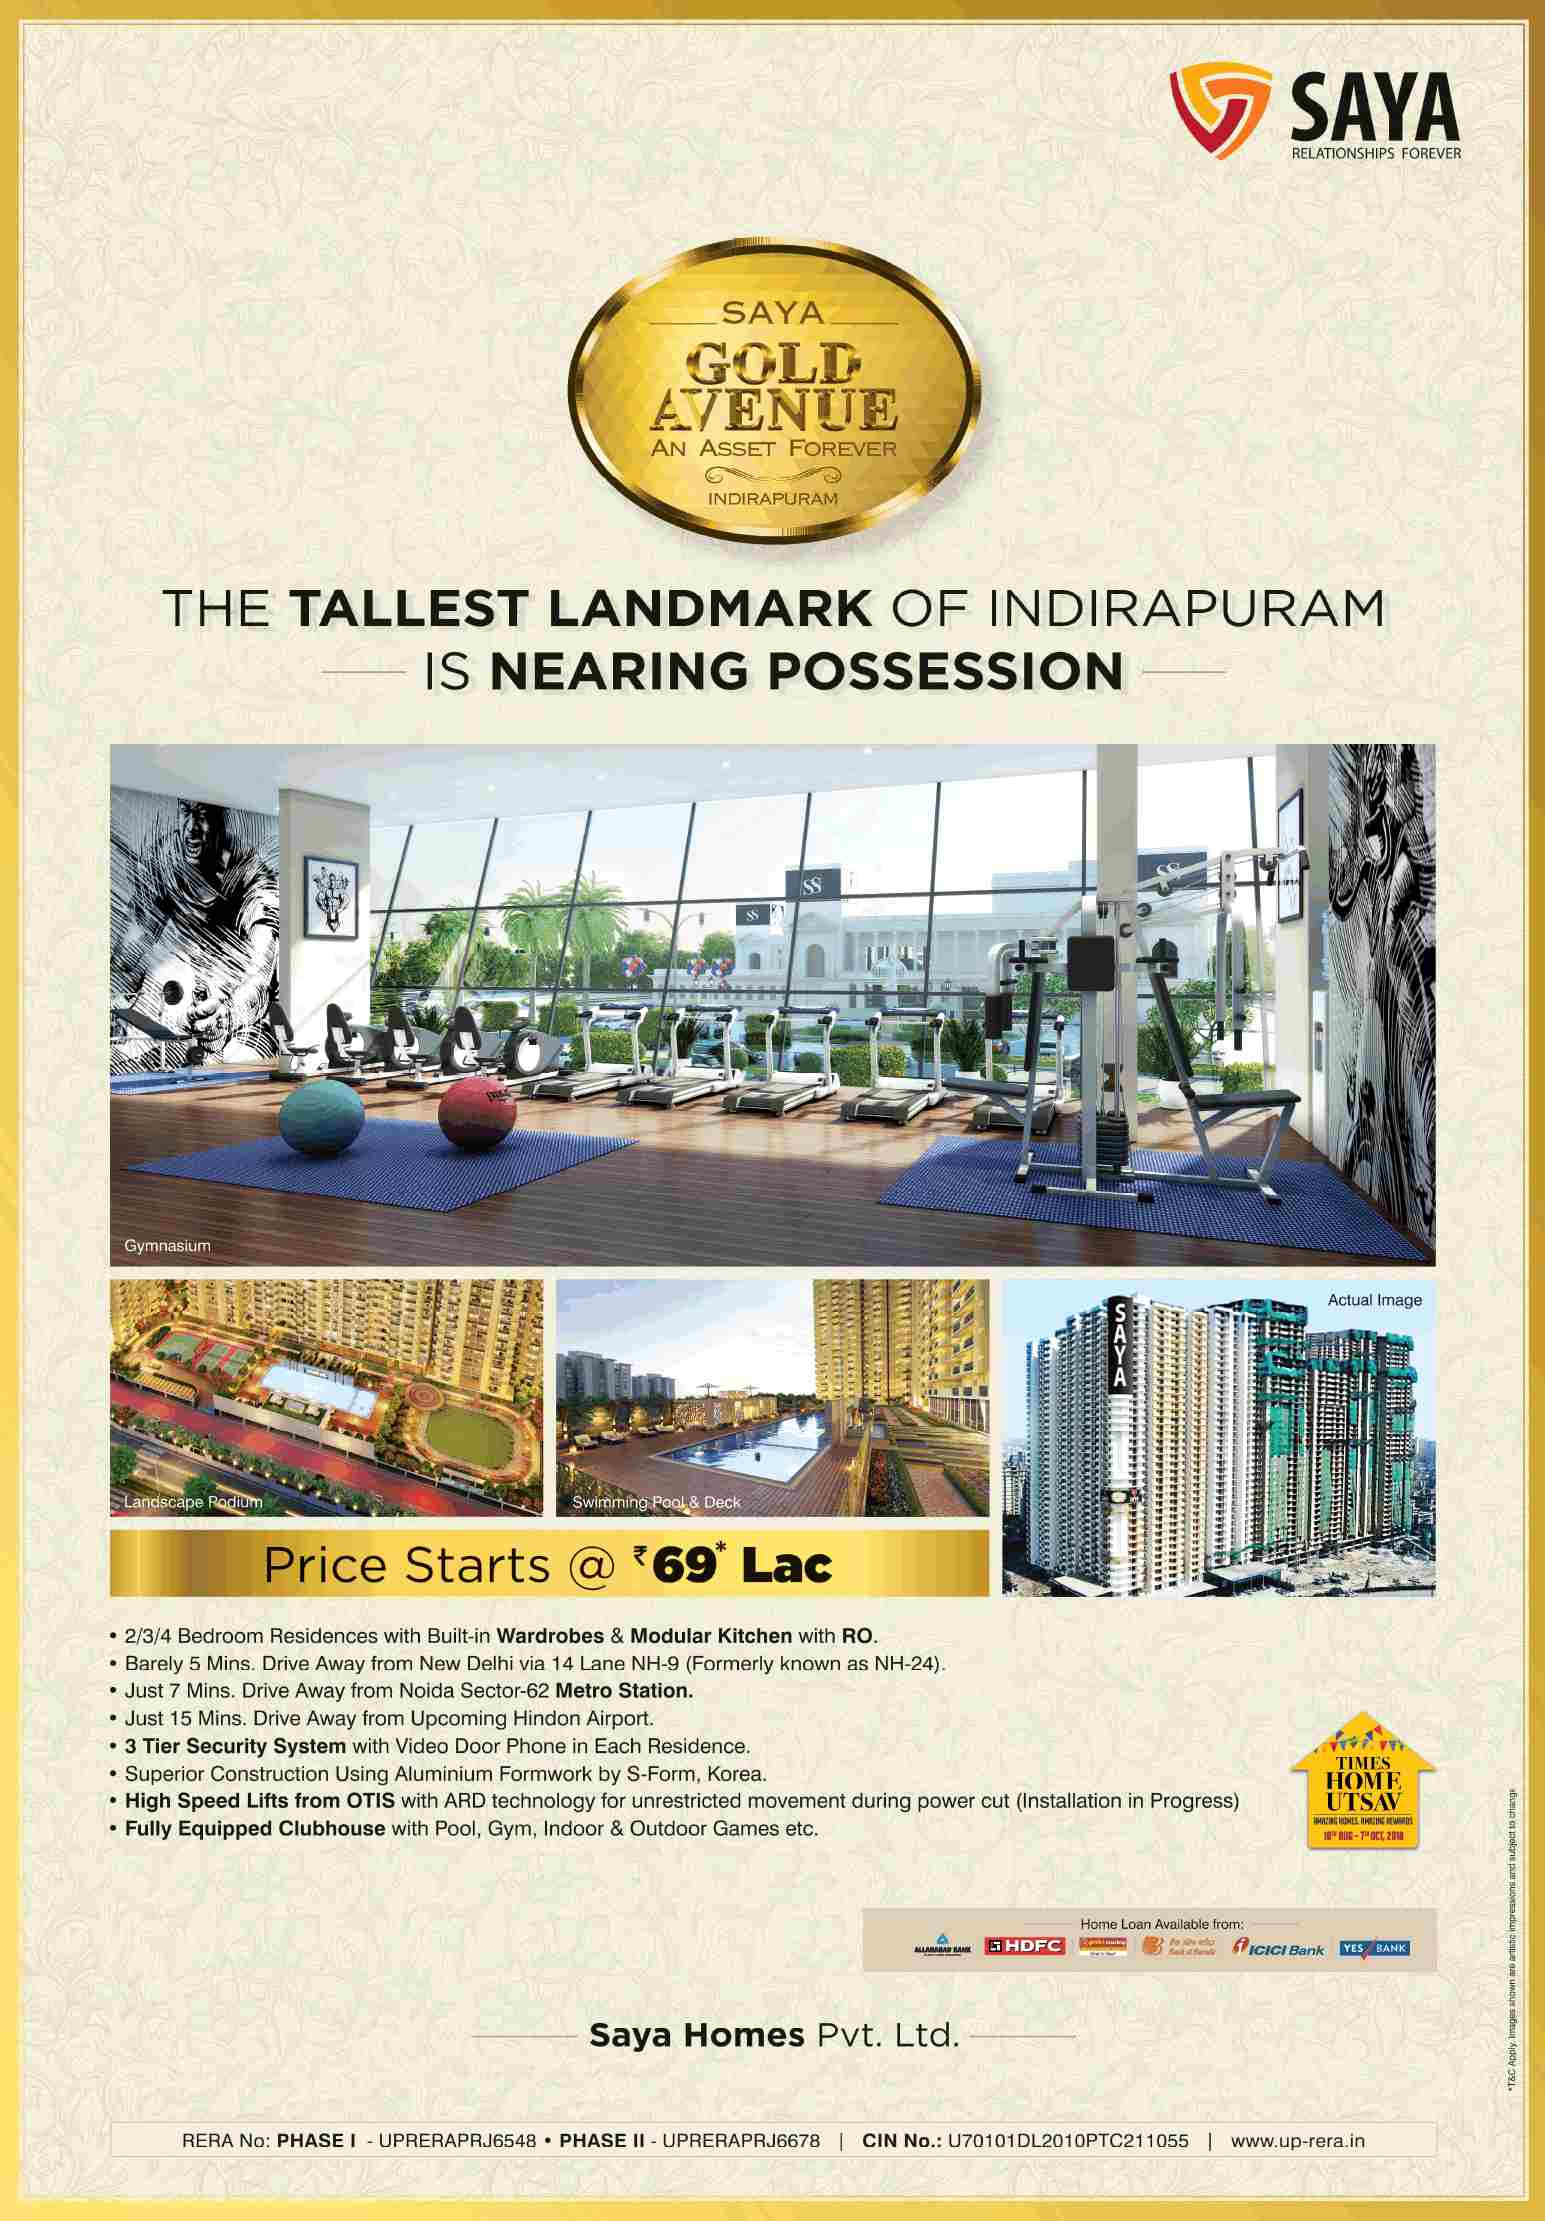 Book homes @ Rs. 69 Lacs onwards at Saya Gold Avenue in Ghaziabad